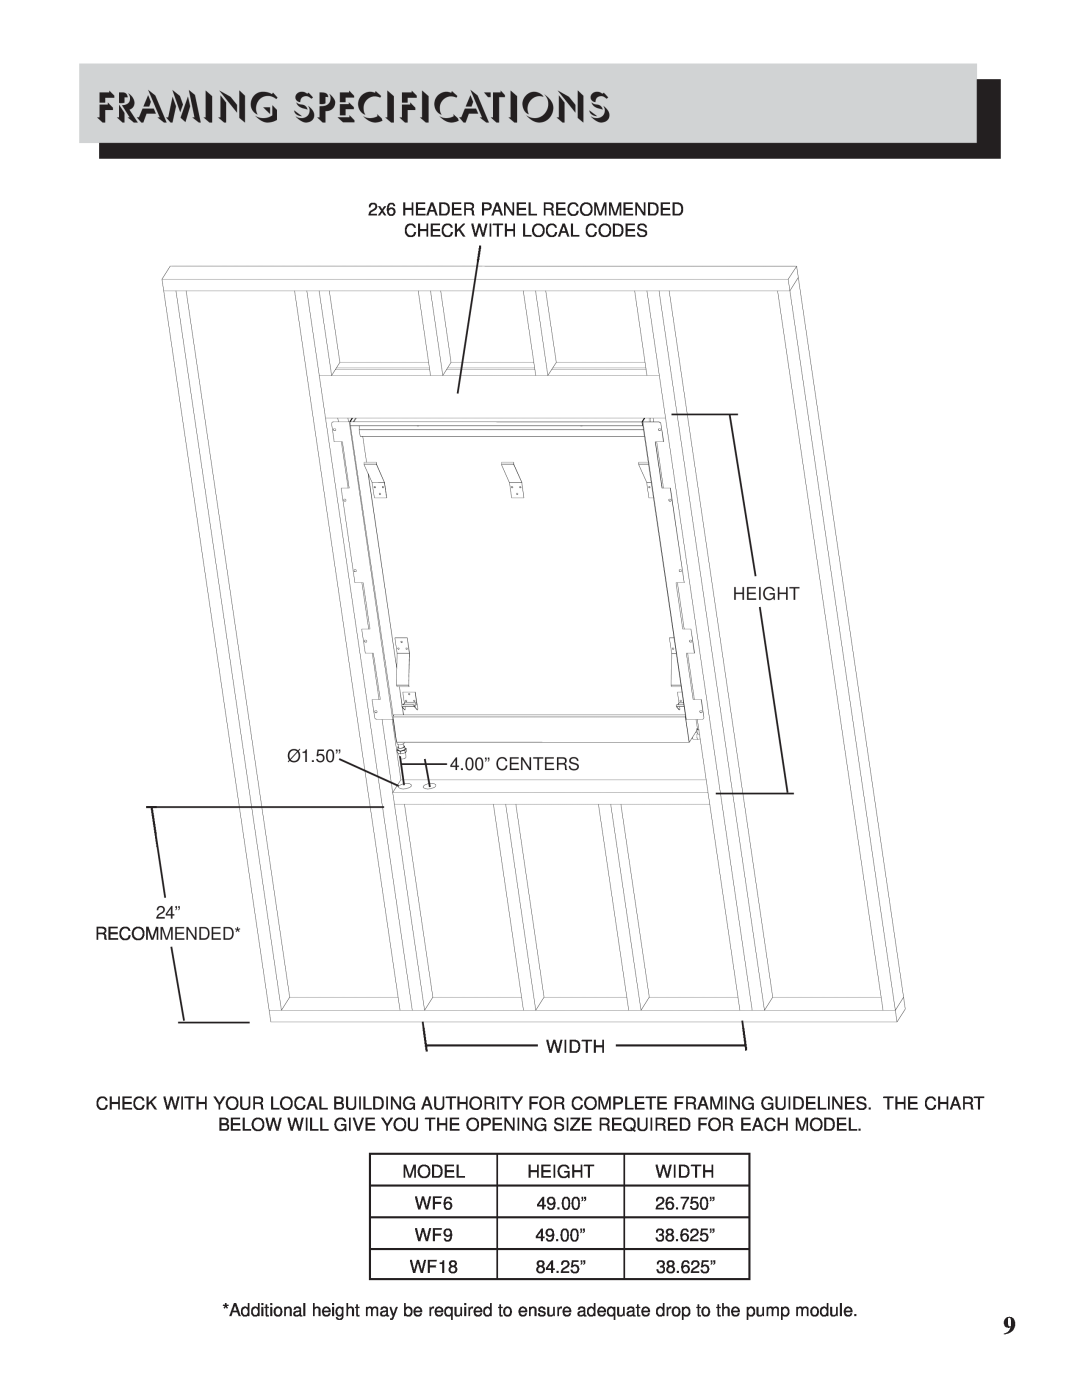 Napoleon Fireplaces WF 6/9/18 manual Framing Specifications 